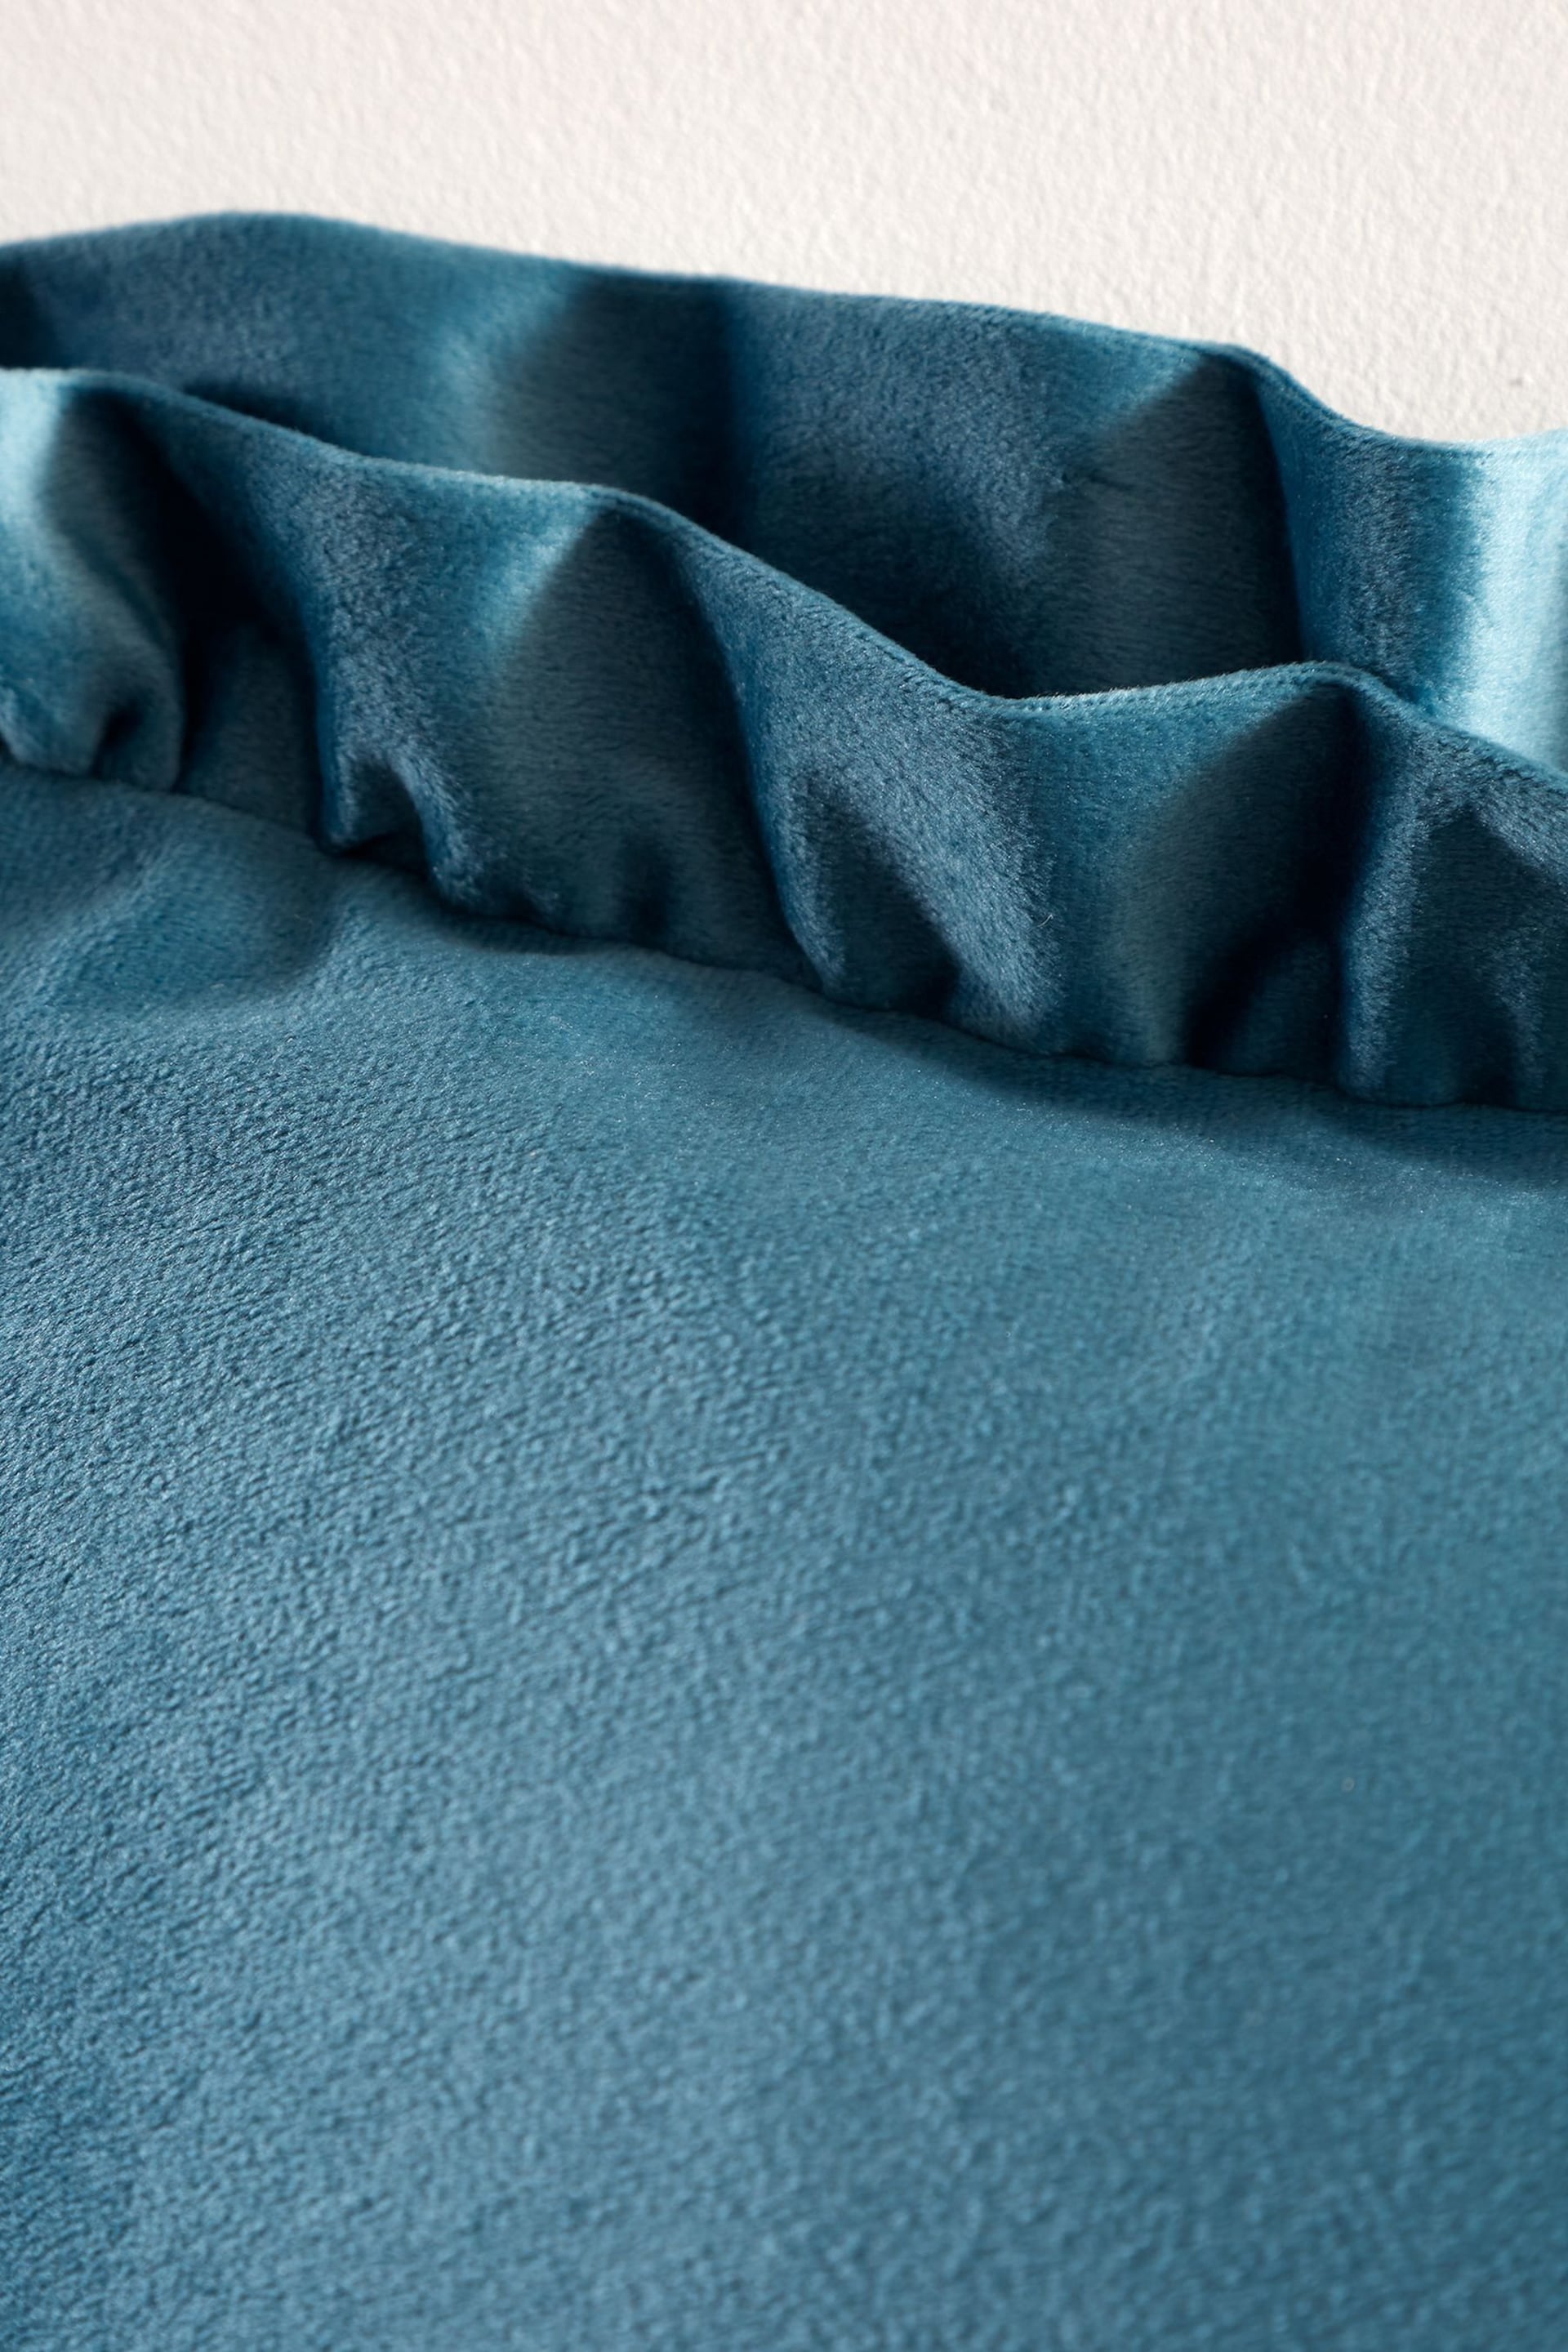 Catherine Lansfield Teal So Soft Velvet Double Frill Cushion - Image 3 of 4